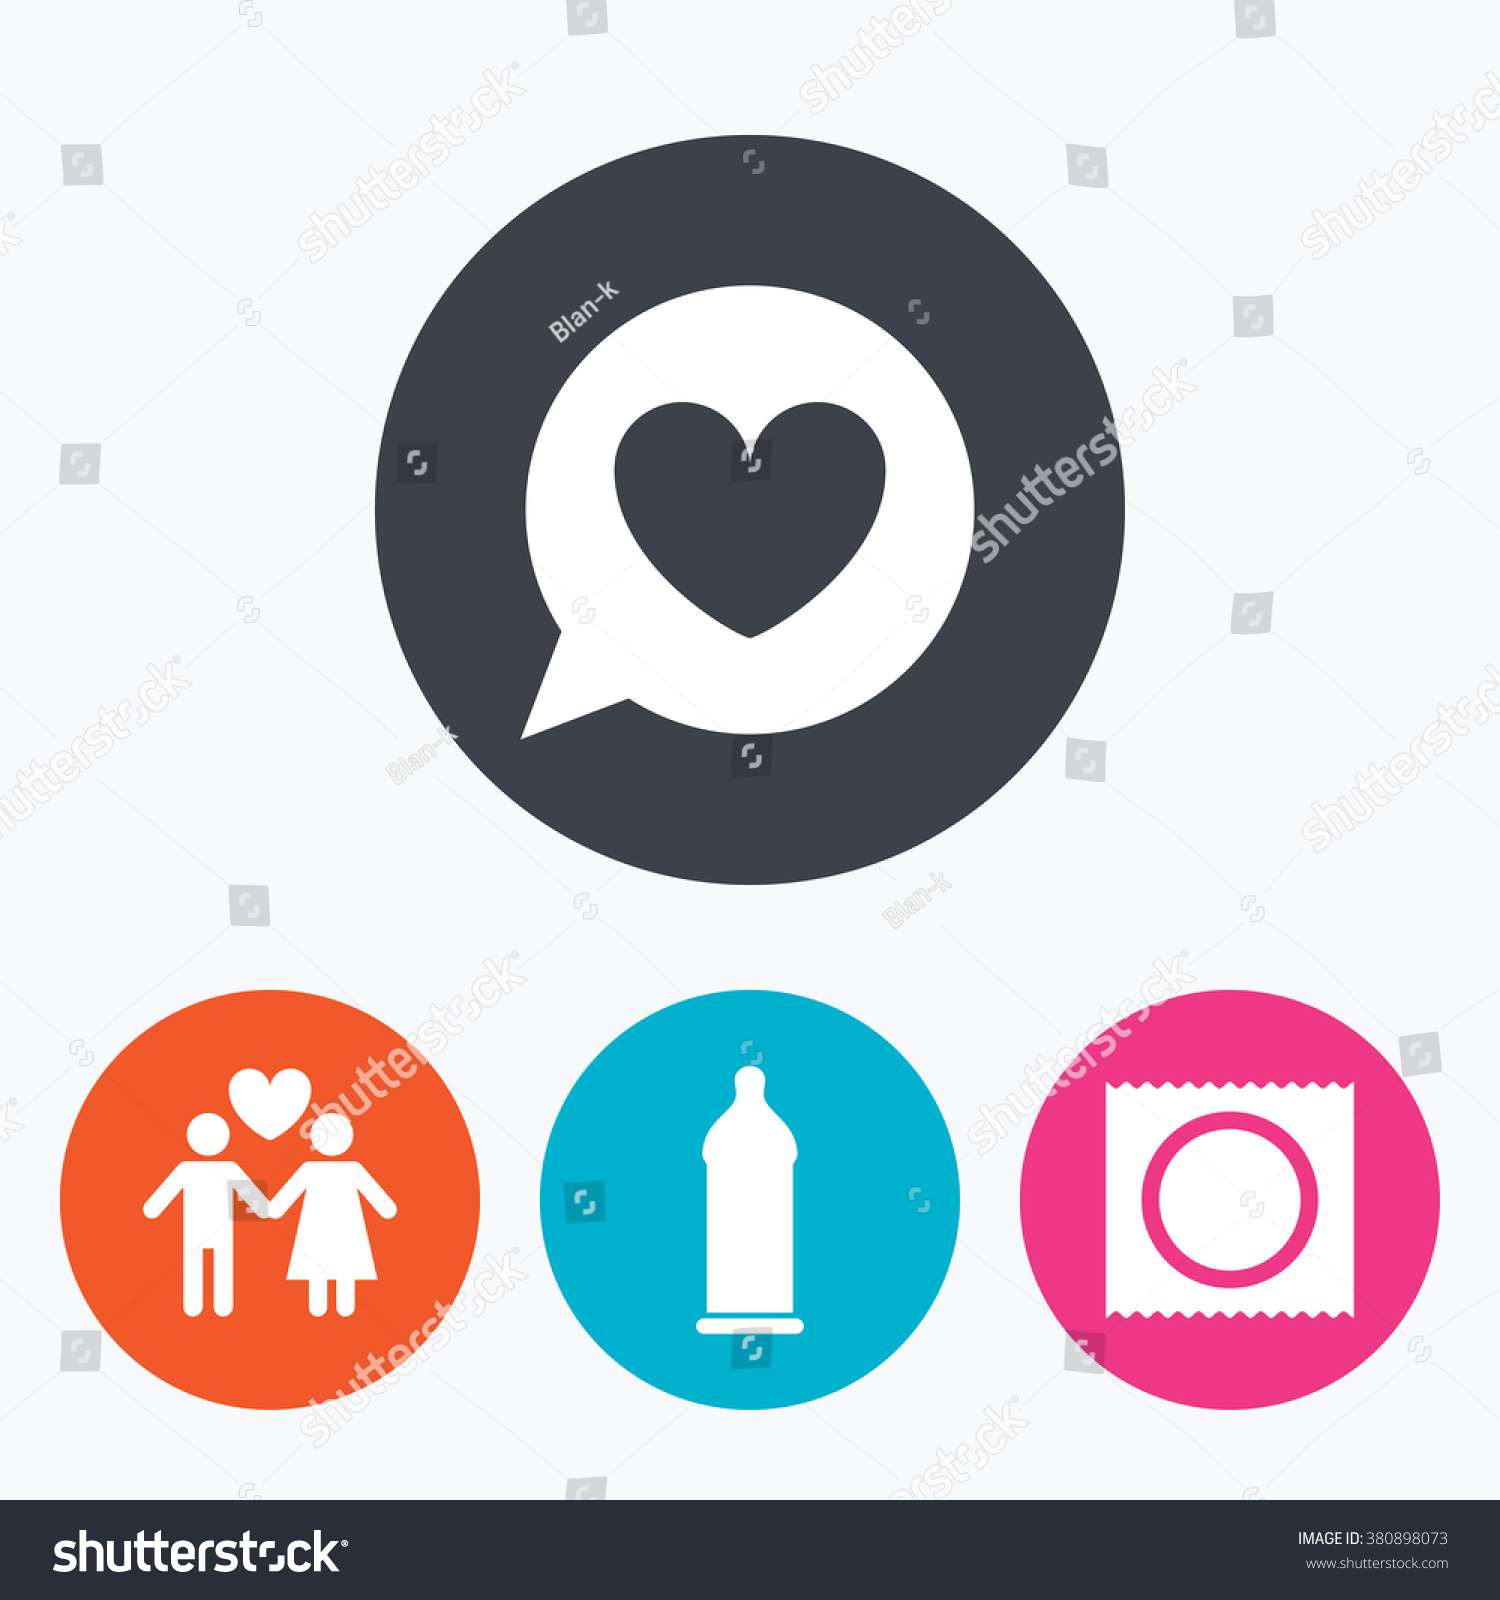 Condom Safe Sex Icons Lovers Couple Stock Vector Royalty Free 380898073 Shutterstock 2908